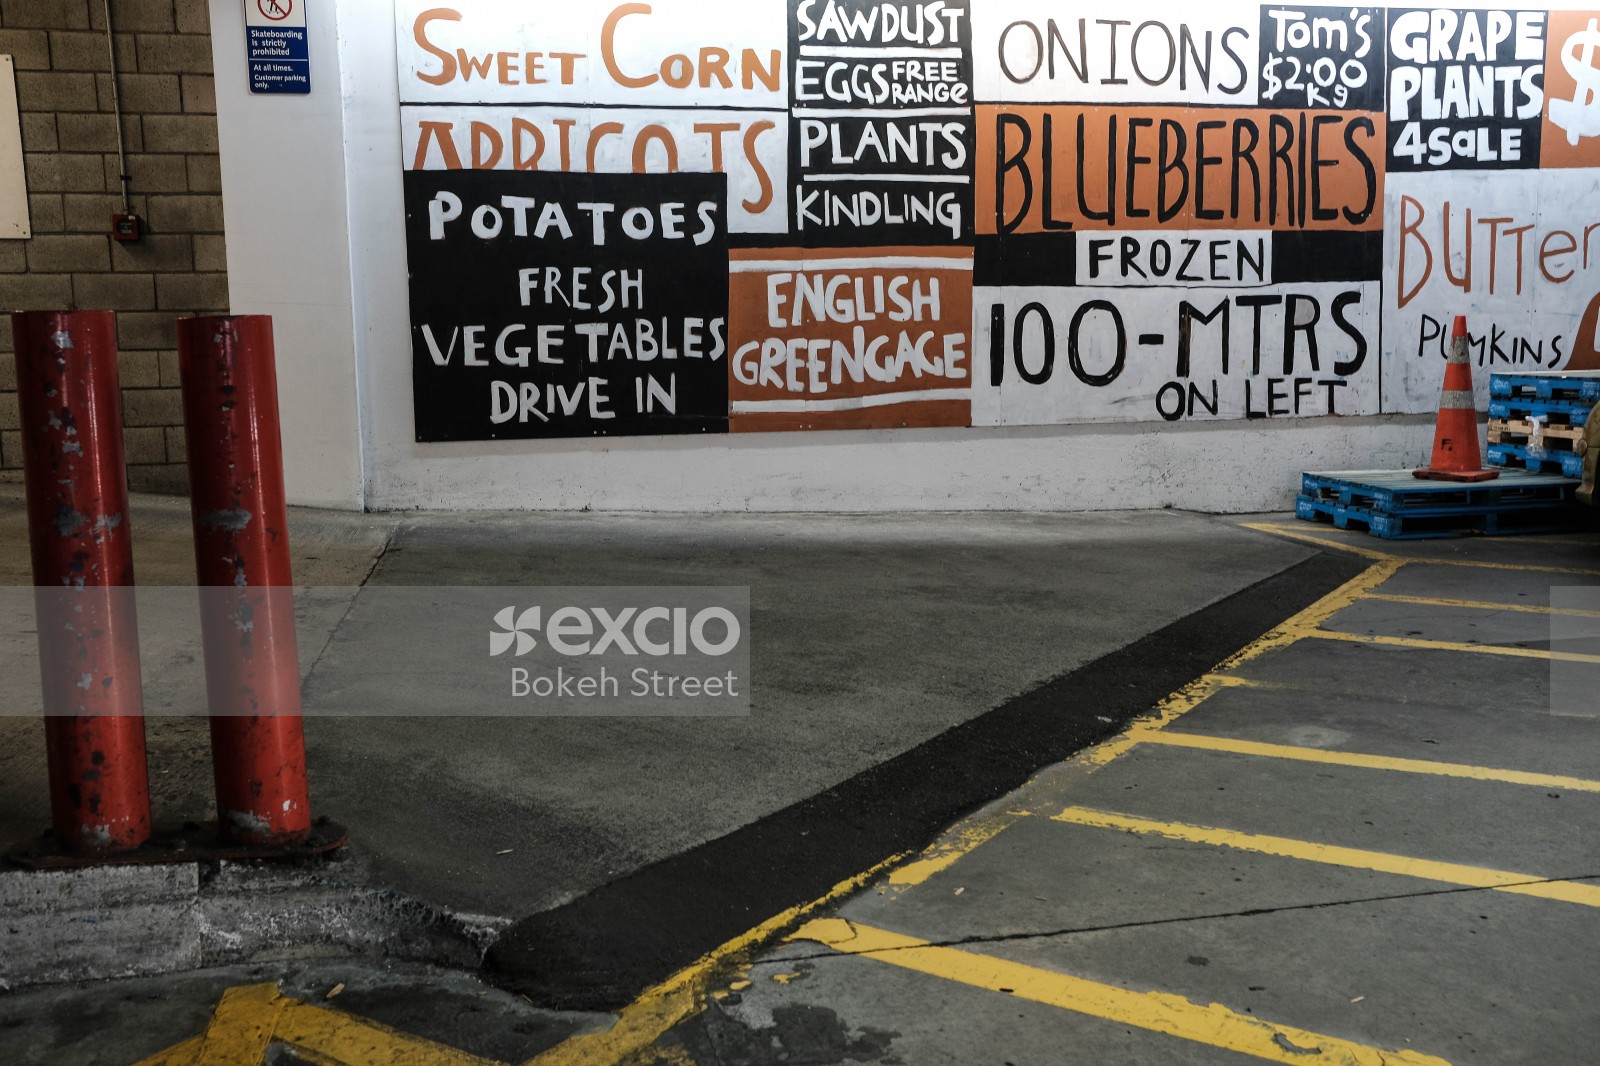 Produce banner advertised on a wall caution cone